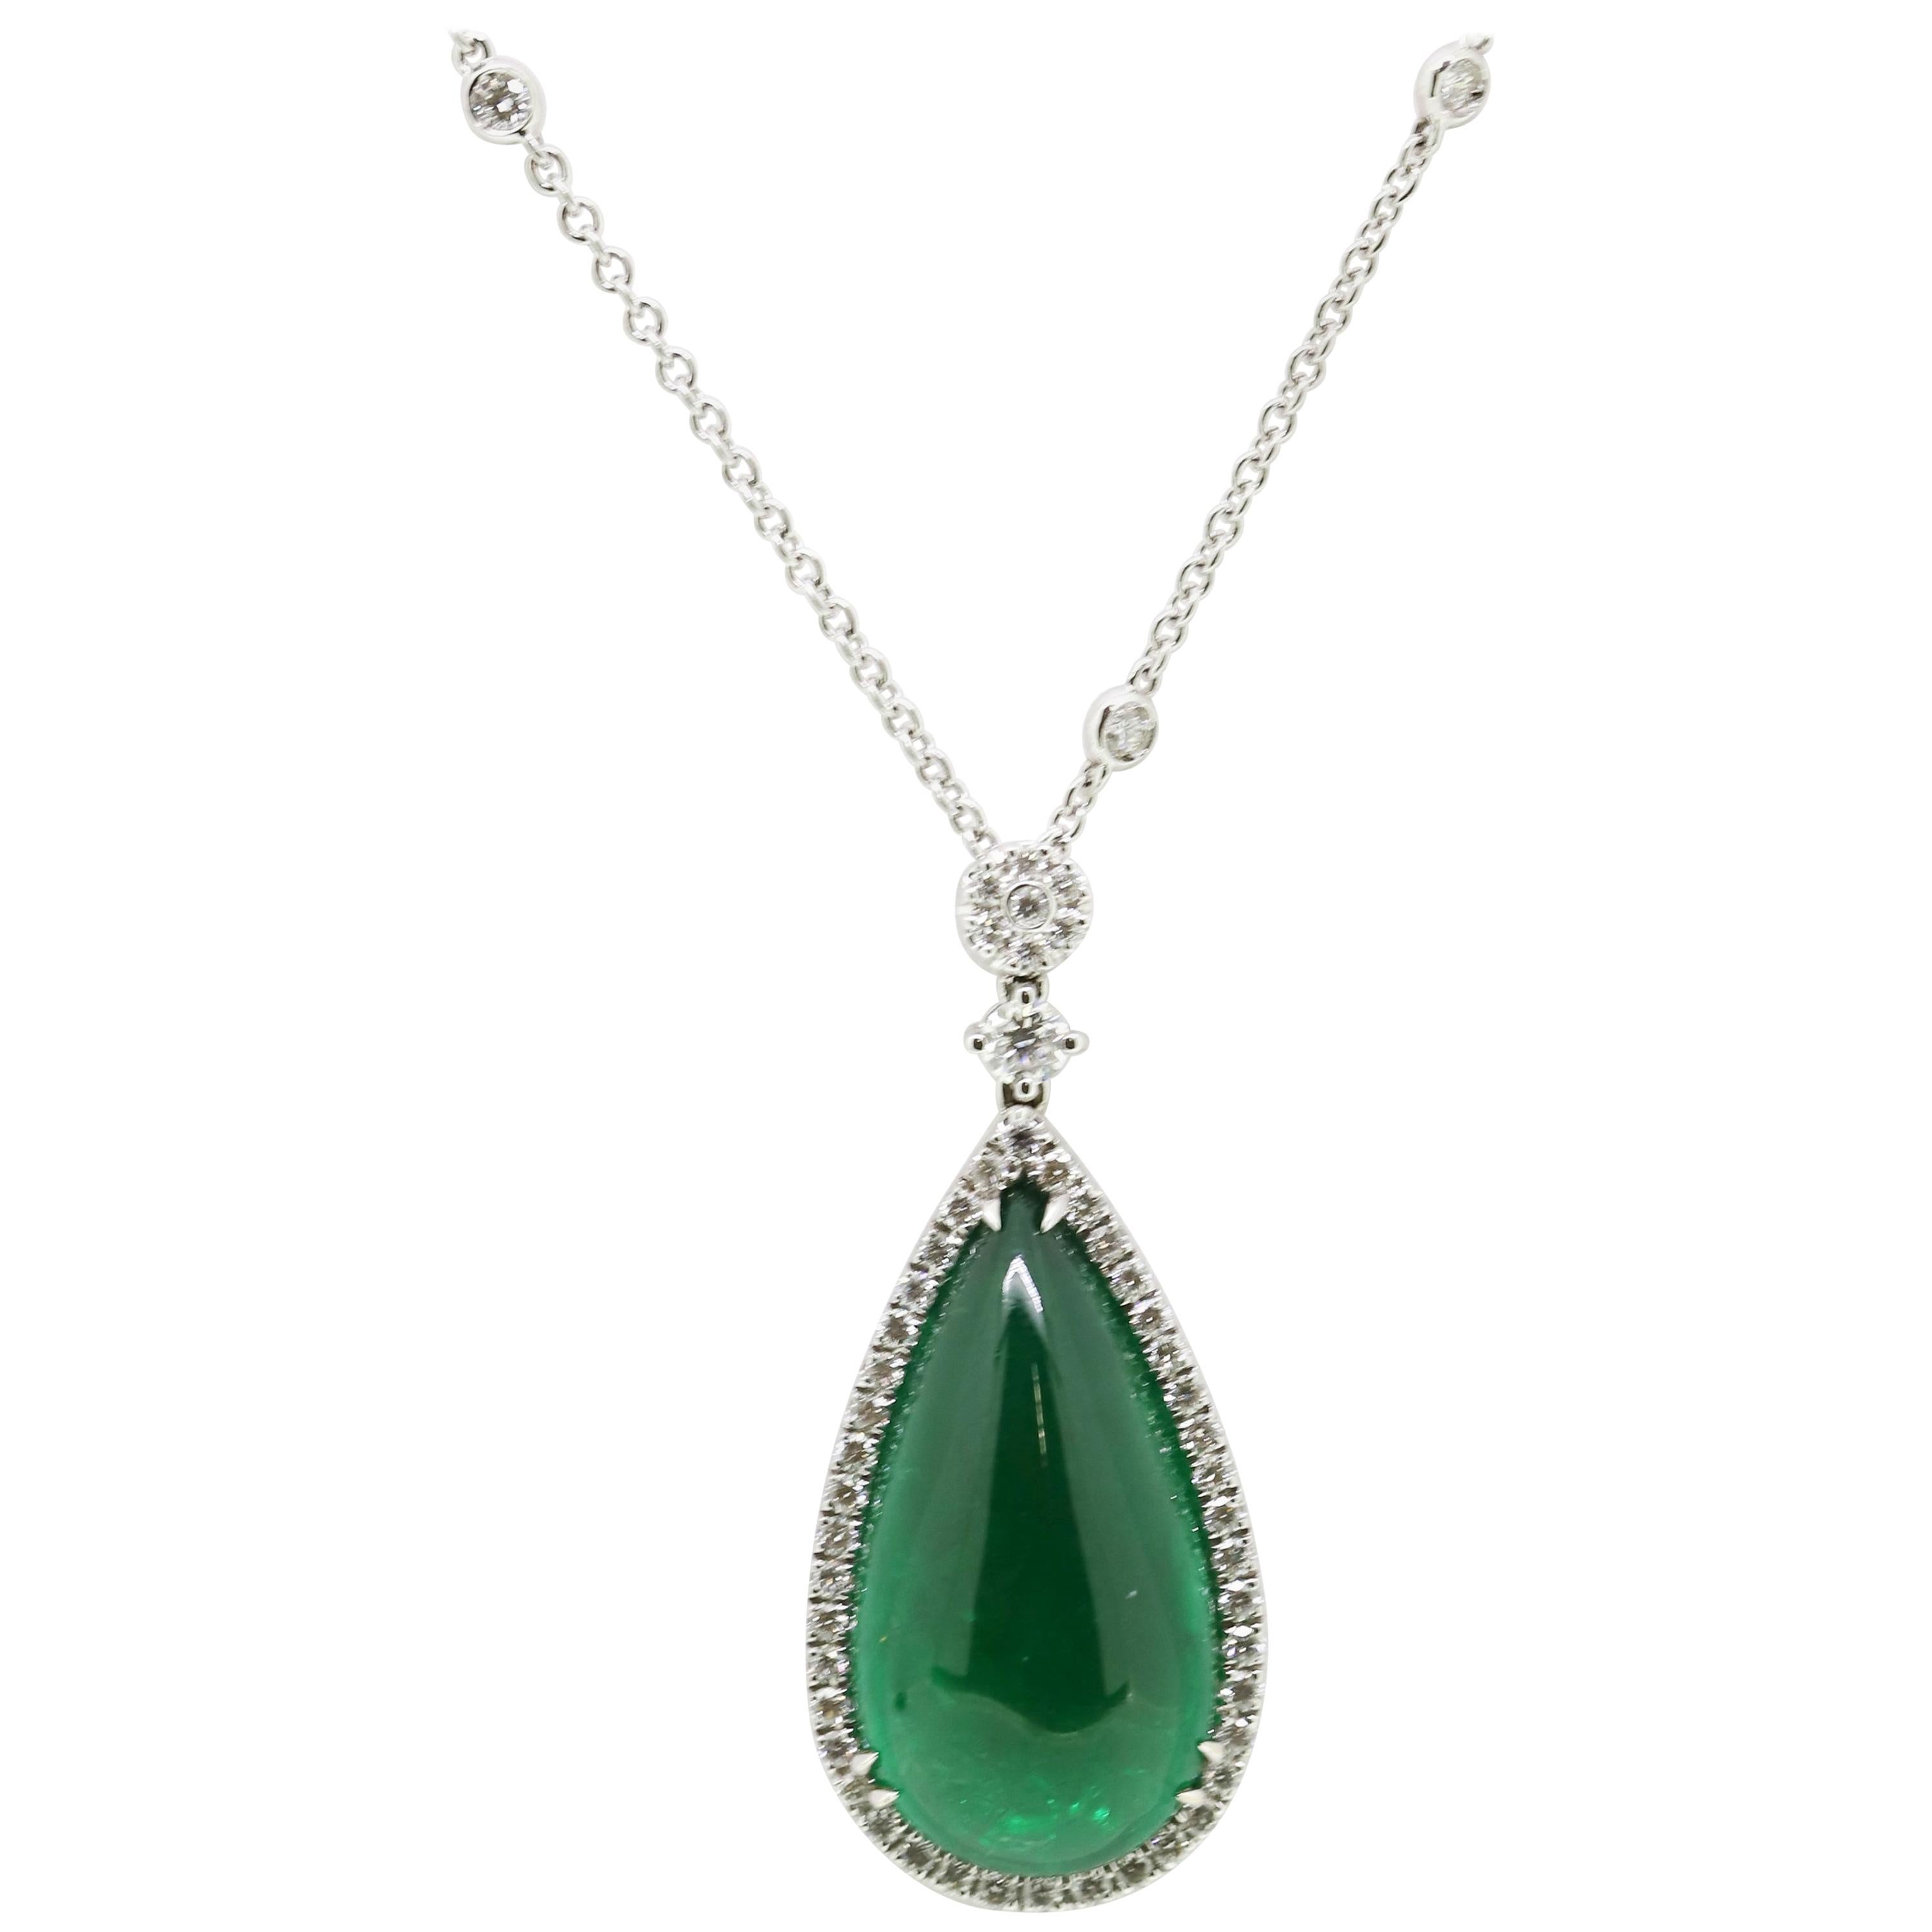 13.28 Carat Emerald Cabouchon with White Diamonds Pendant Necklace For Sale